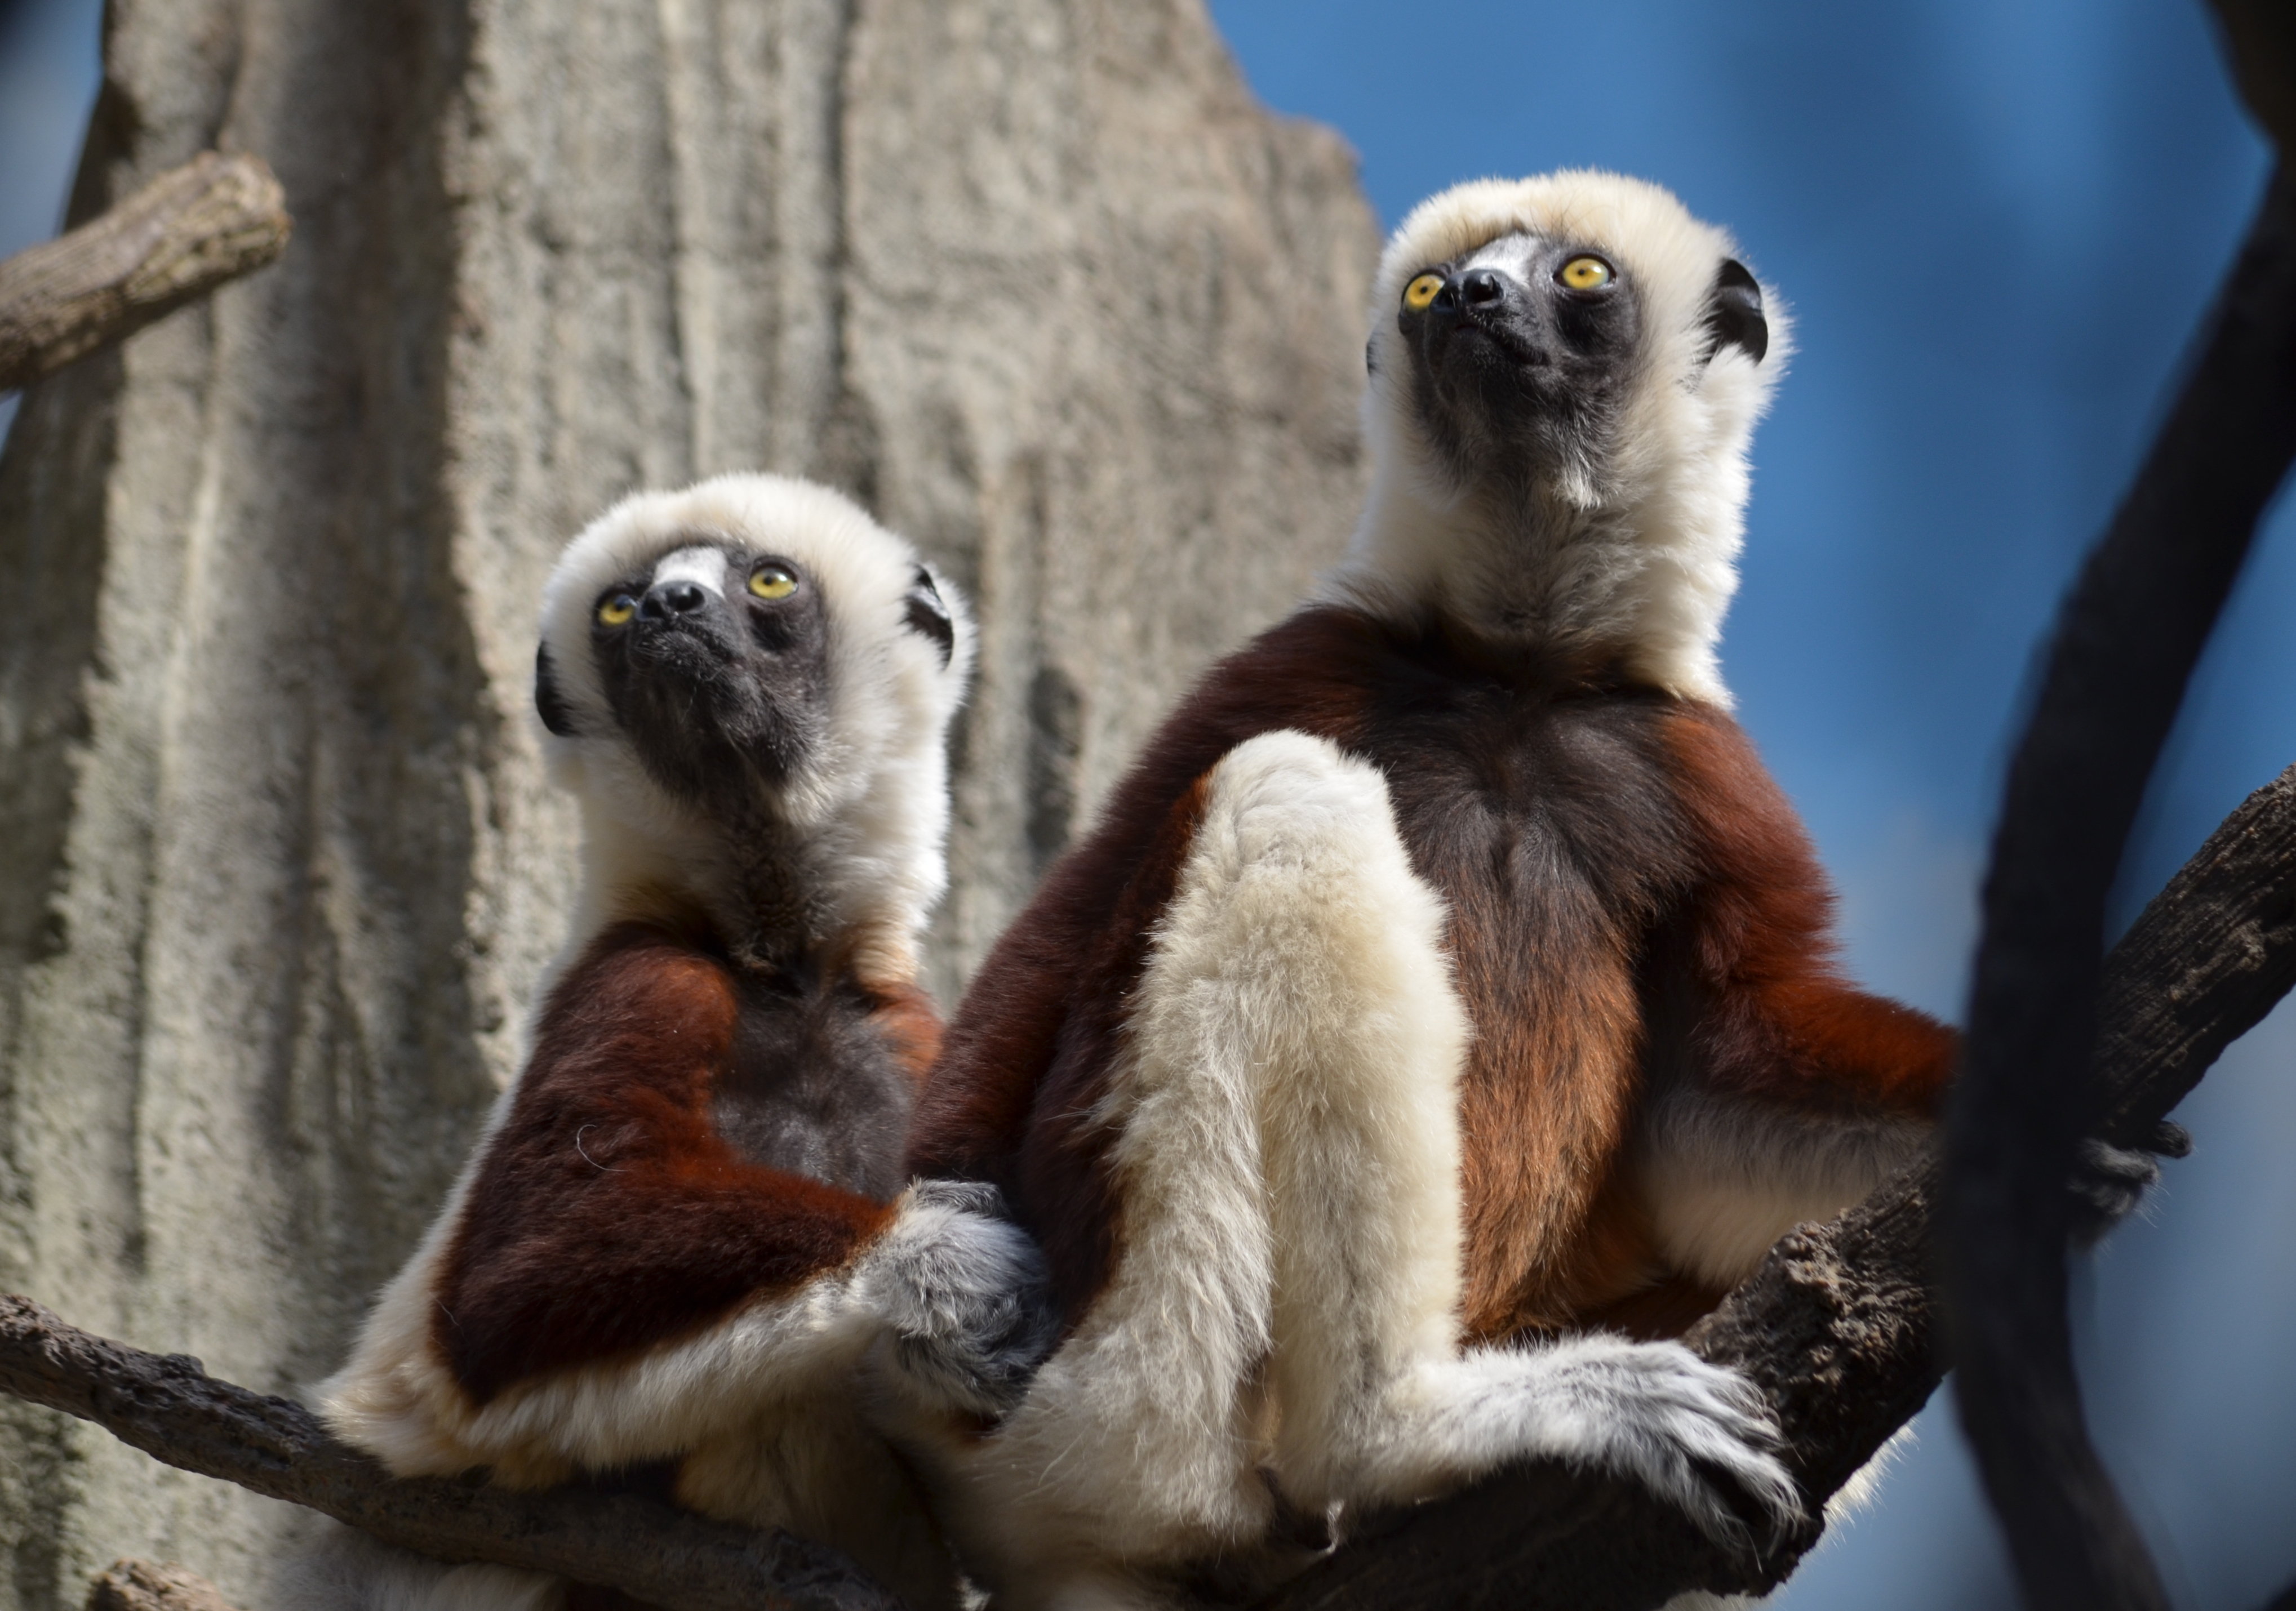 Coquerel's Sifaka at the Bronx Zoo